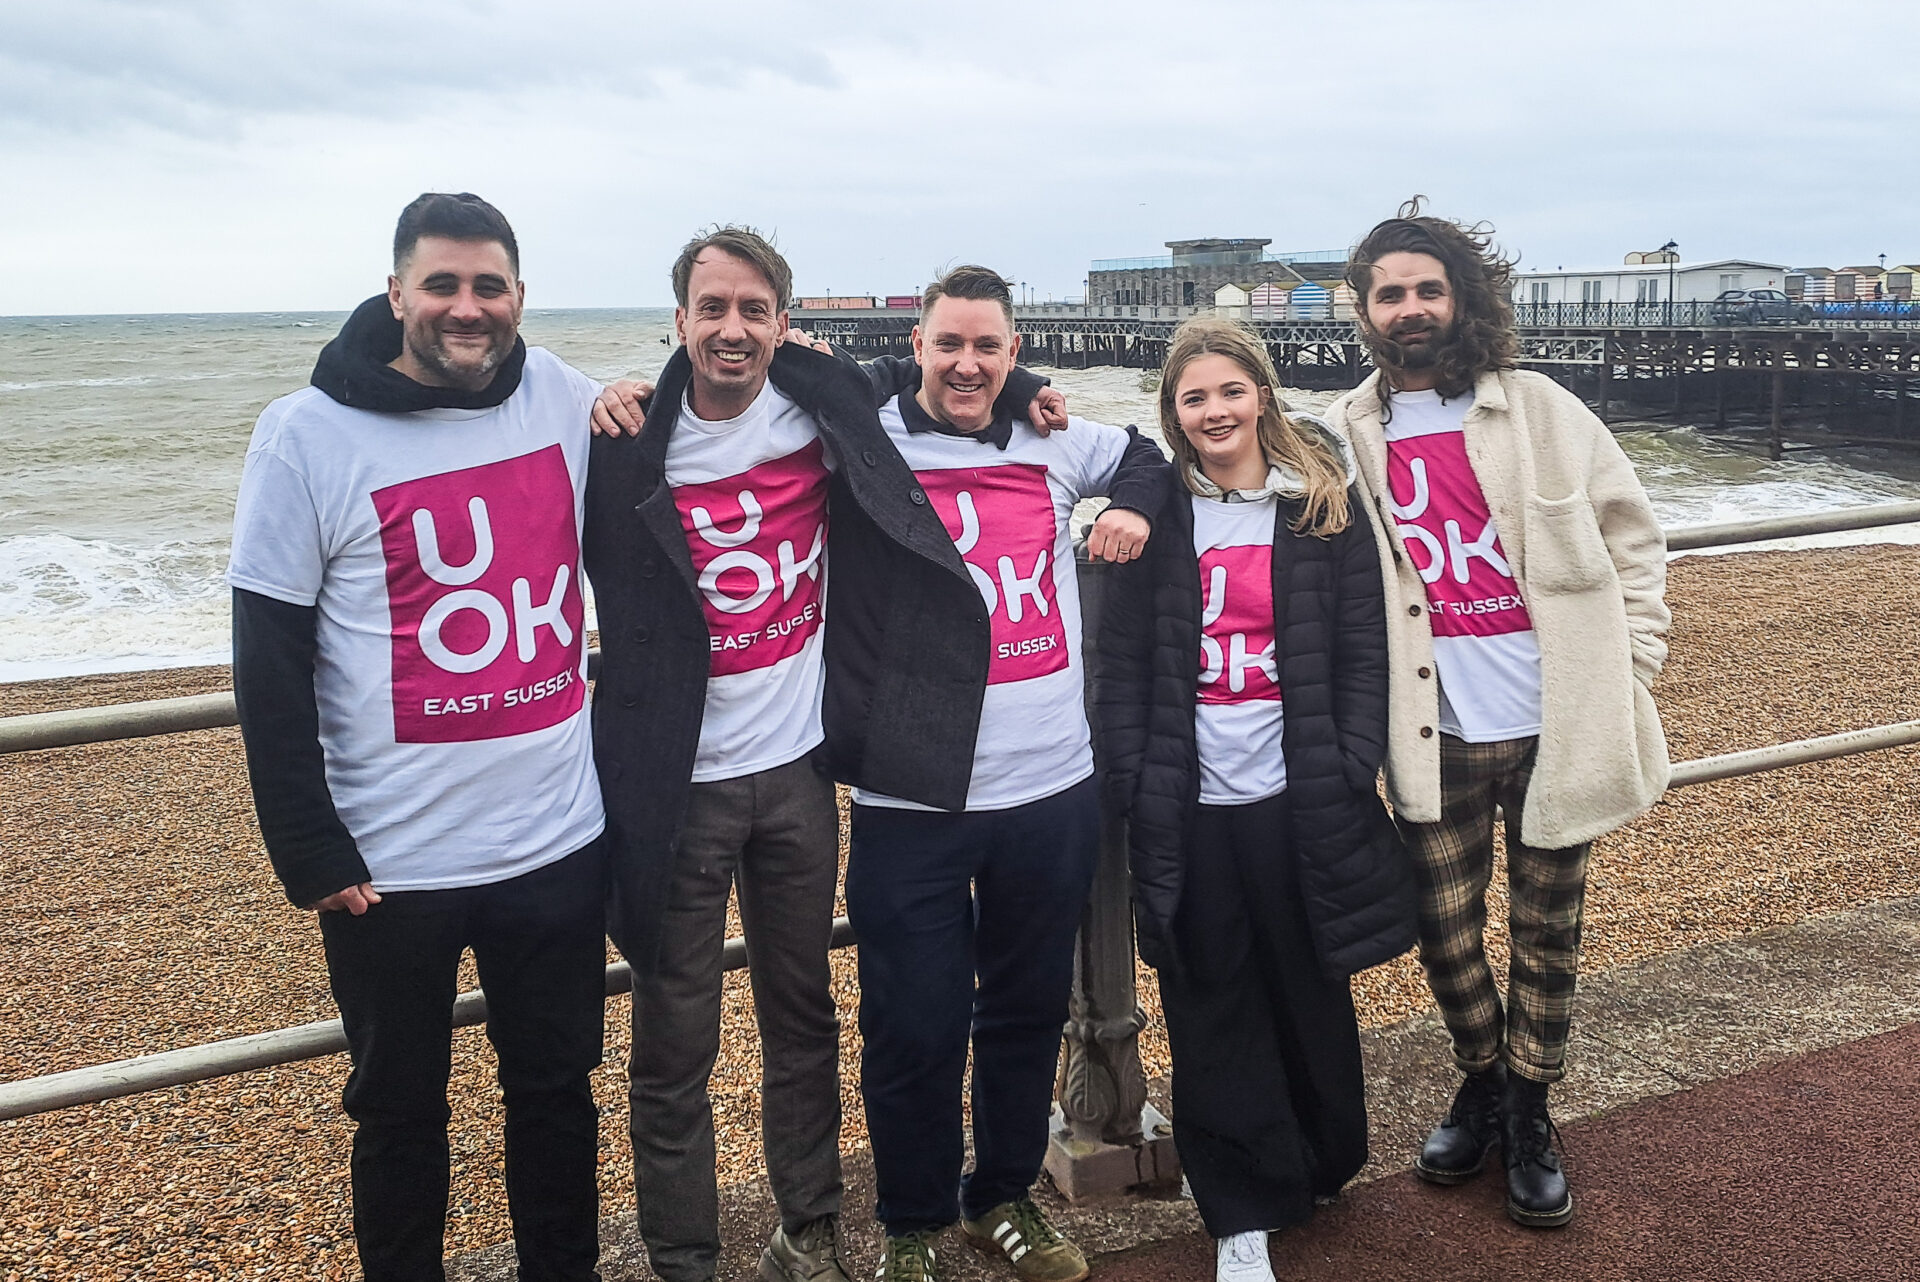 Southdown Mental Health Support Coordinators celebrate launch of UOK East Sussex on Hastings seafront.